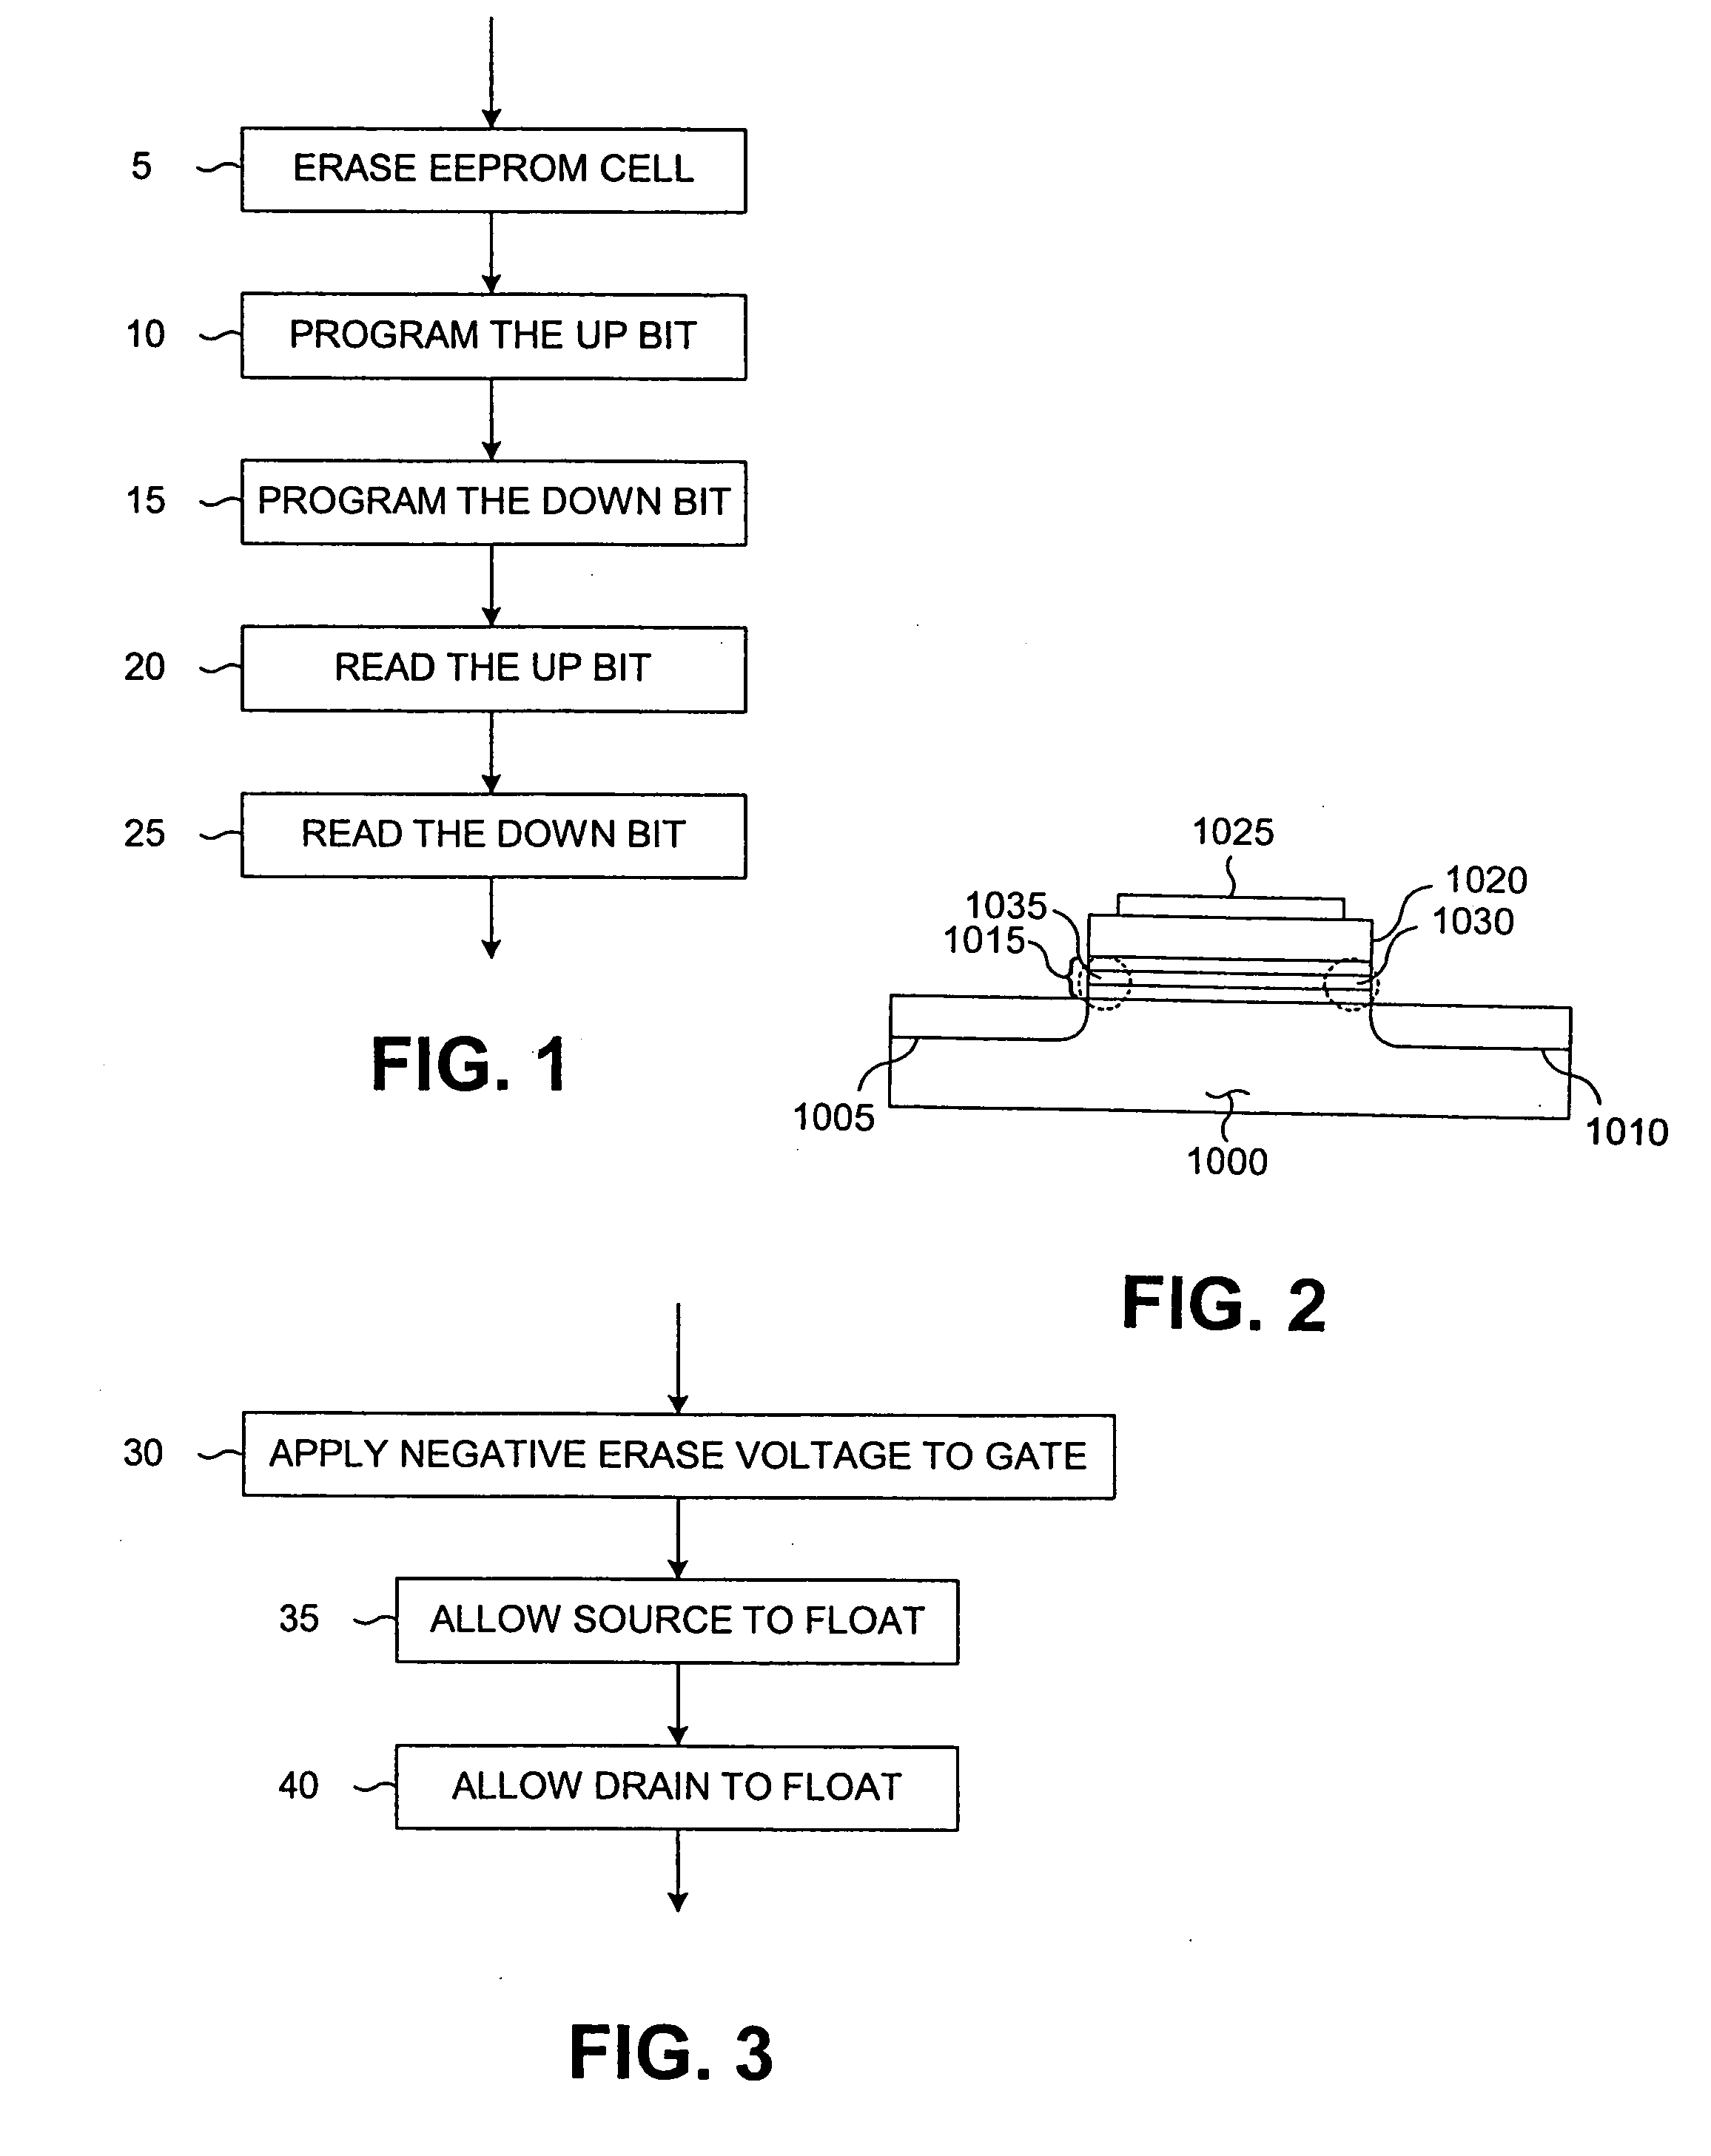 Nand-type non-volatile memory cell and method for operating same